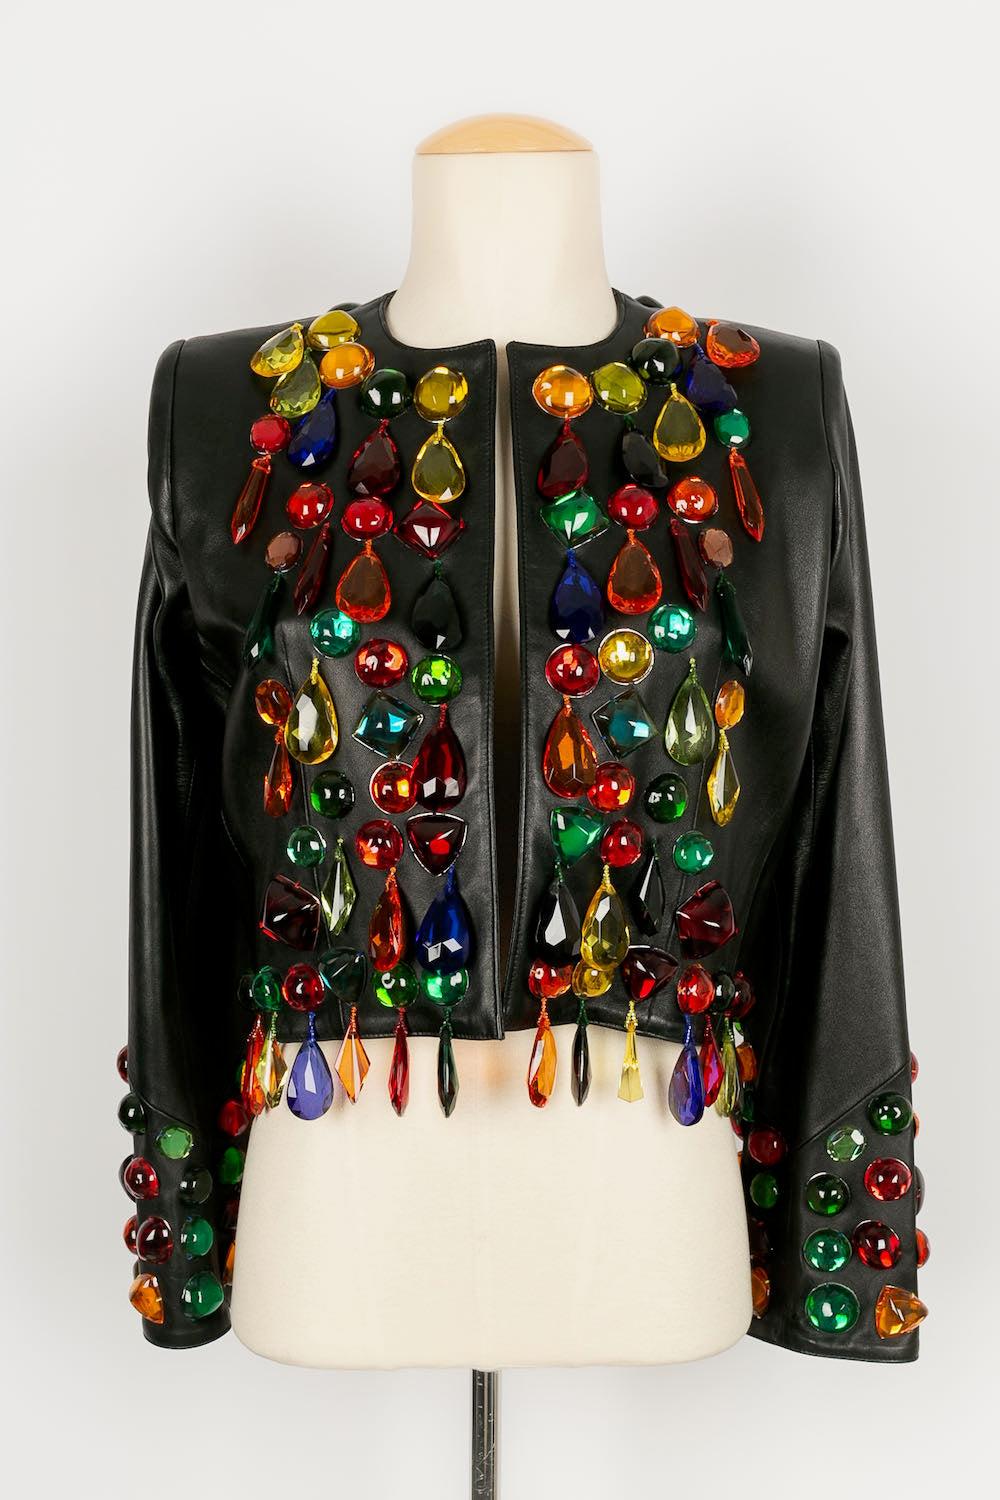 Yves Saint Laurent Leather Suit with Tassels, 1990 For Sale 3